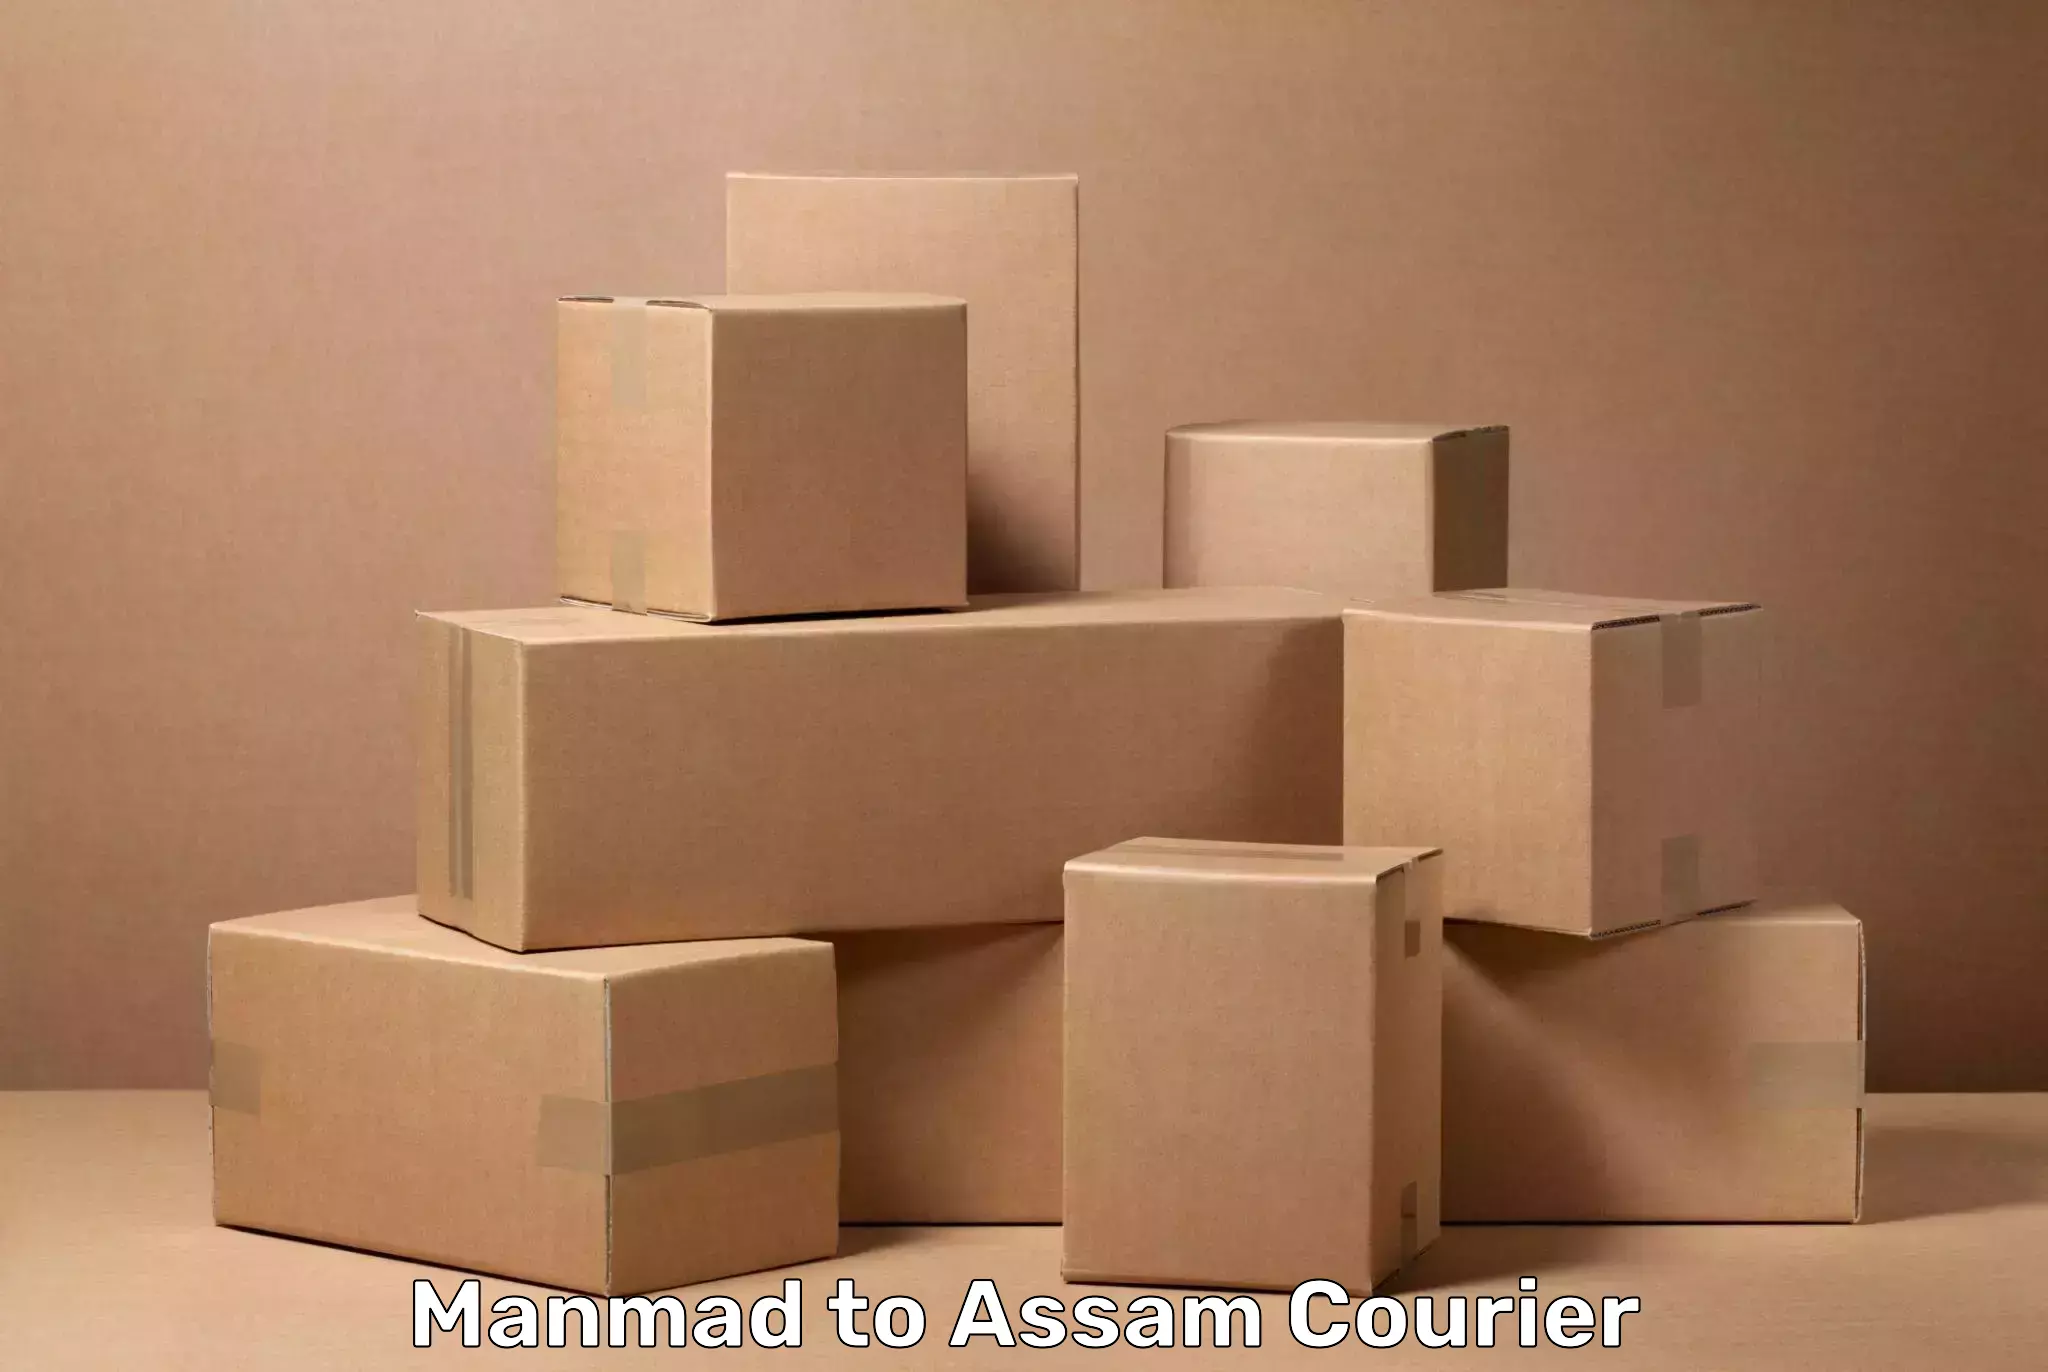 Luggage shipment strategy Manmad to Assam